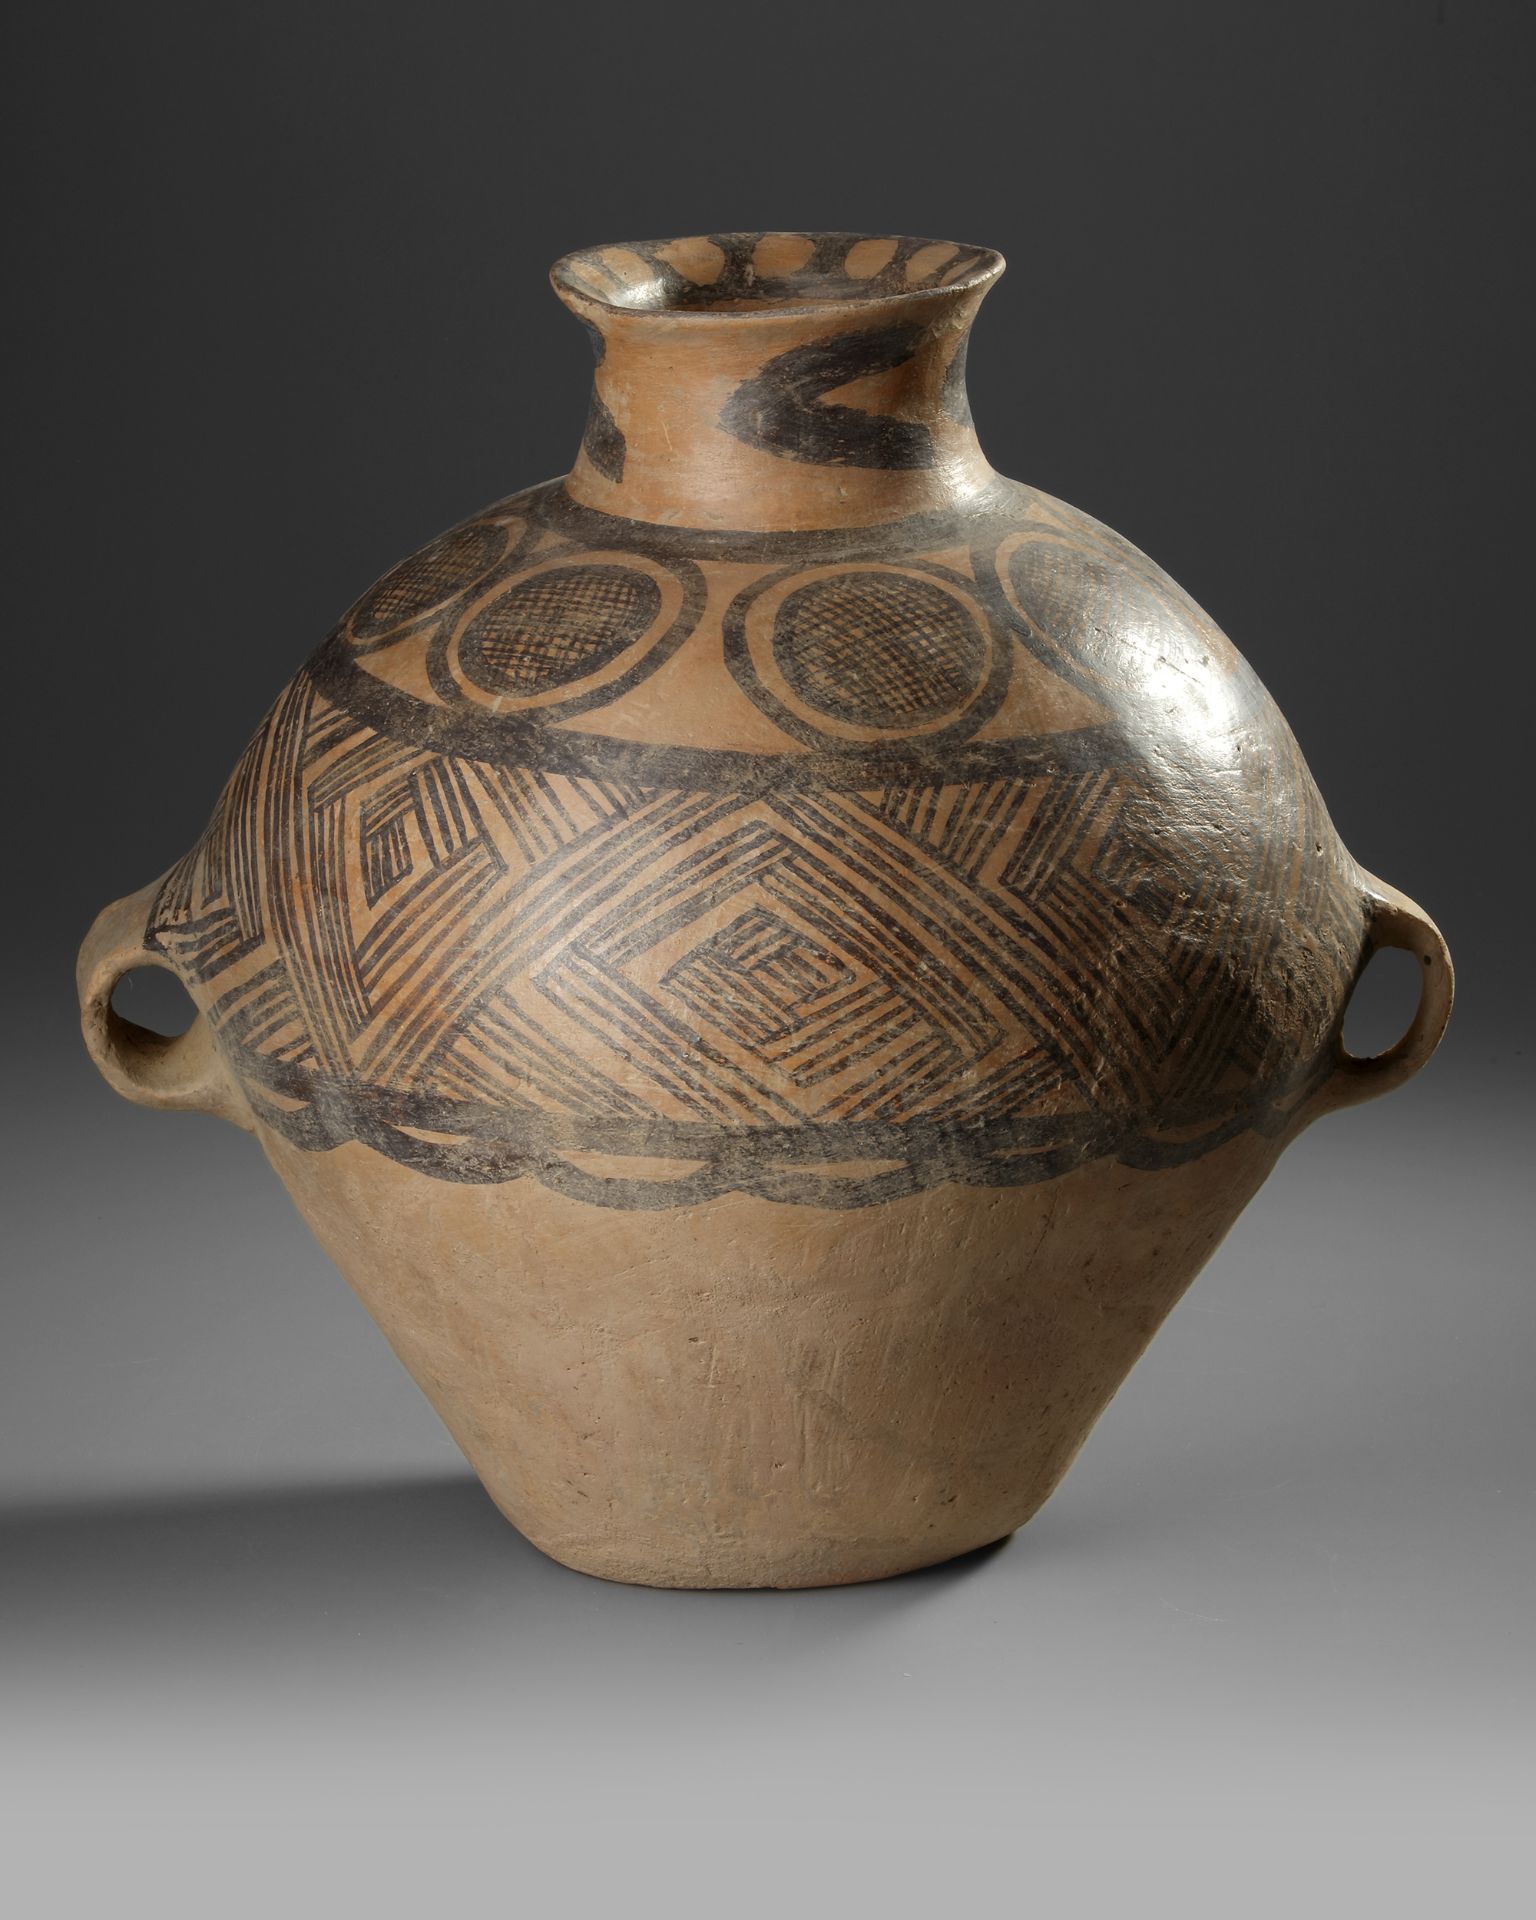 A CHINESE PAINTED POTTERY JAR, NEOLITHIC PERIOD, BANSHAN CULTURE GANSU PROVINCE, 3RD CENTURY